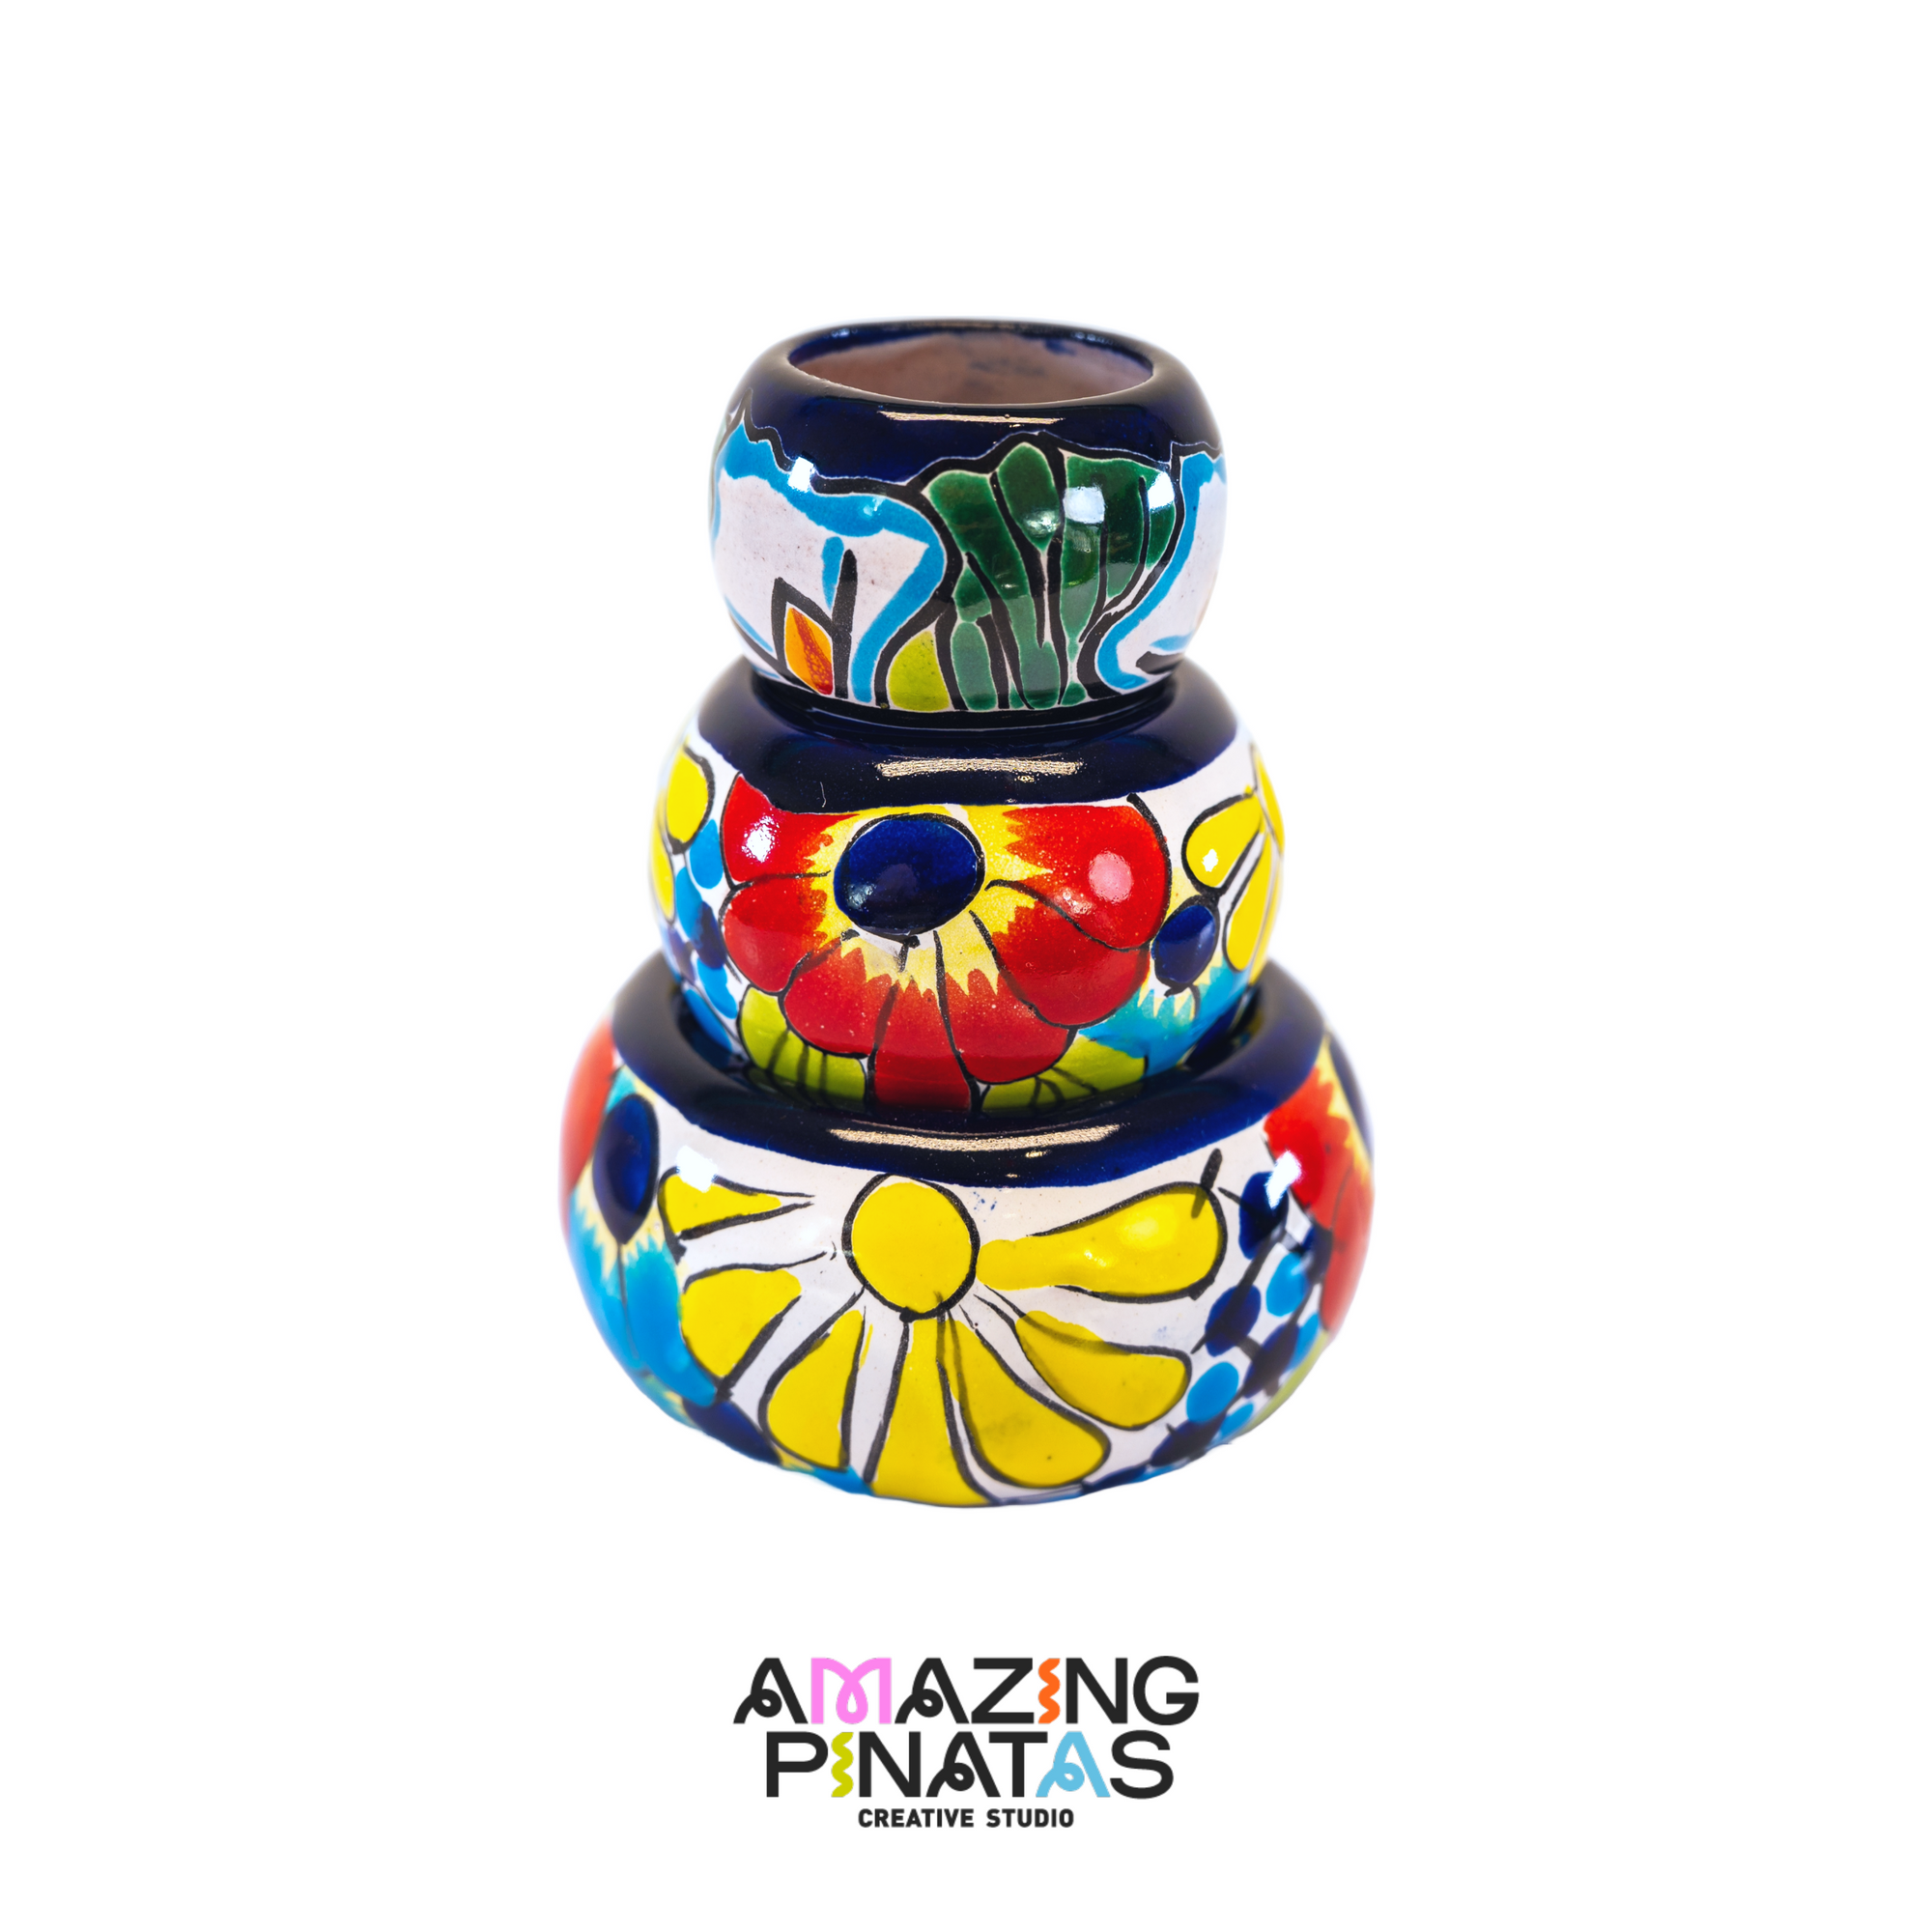 Hand Painted Mexican Set of Pots - Amazing Pinatas 